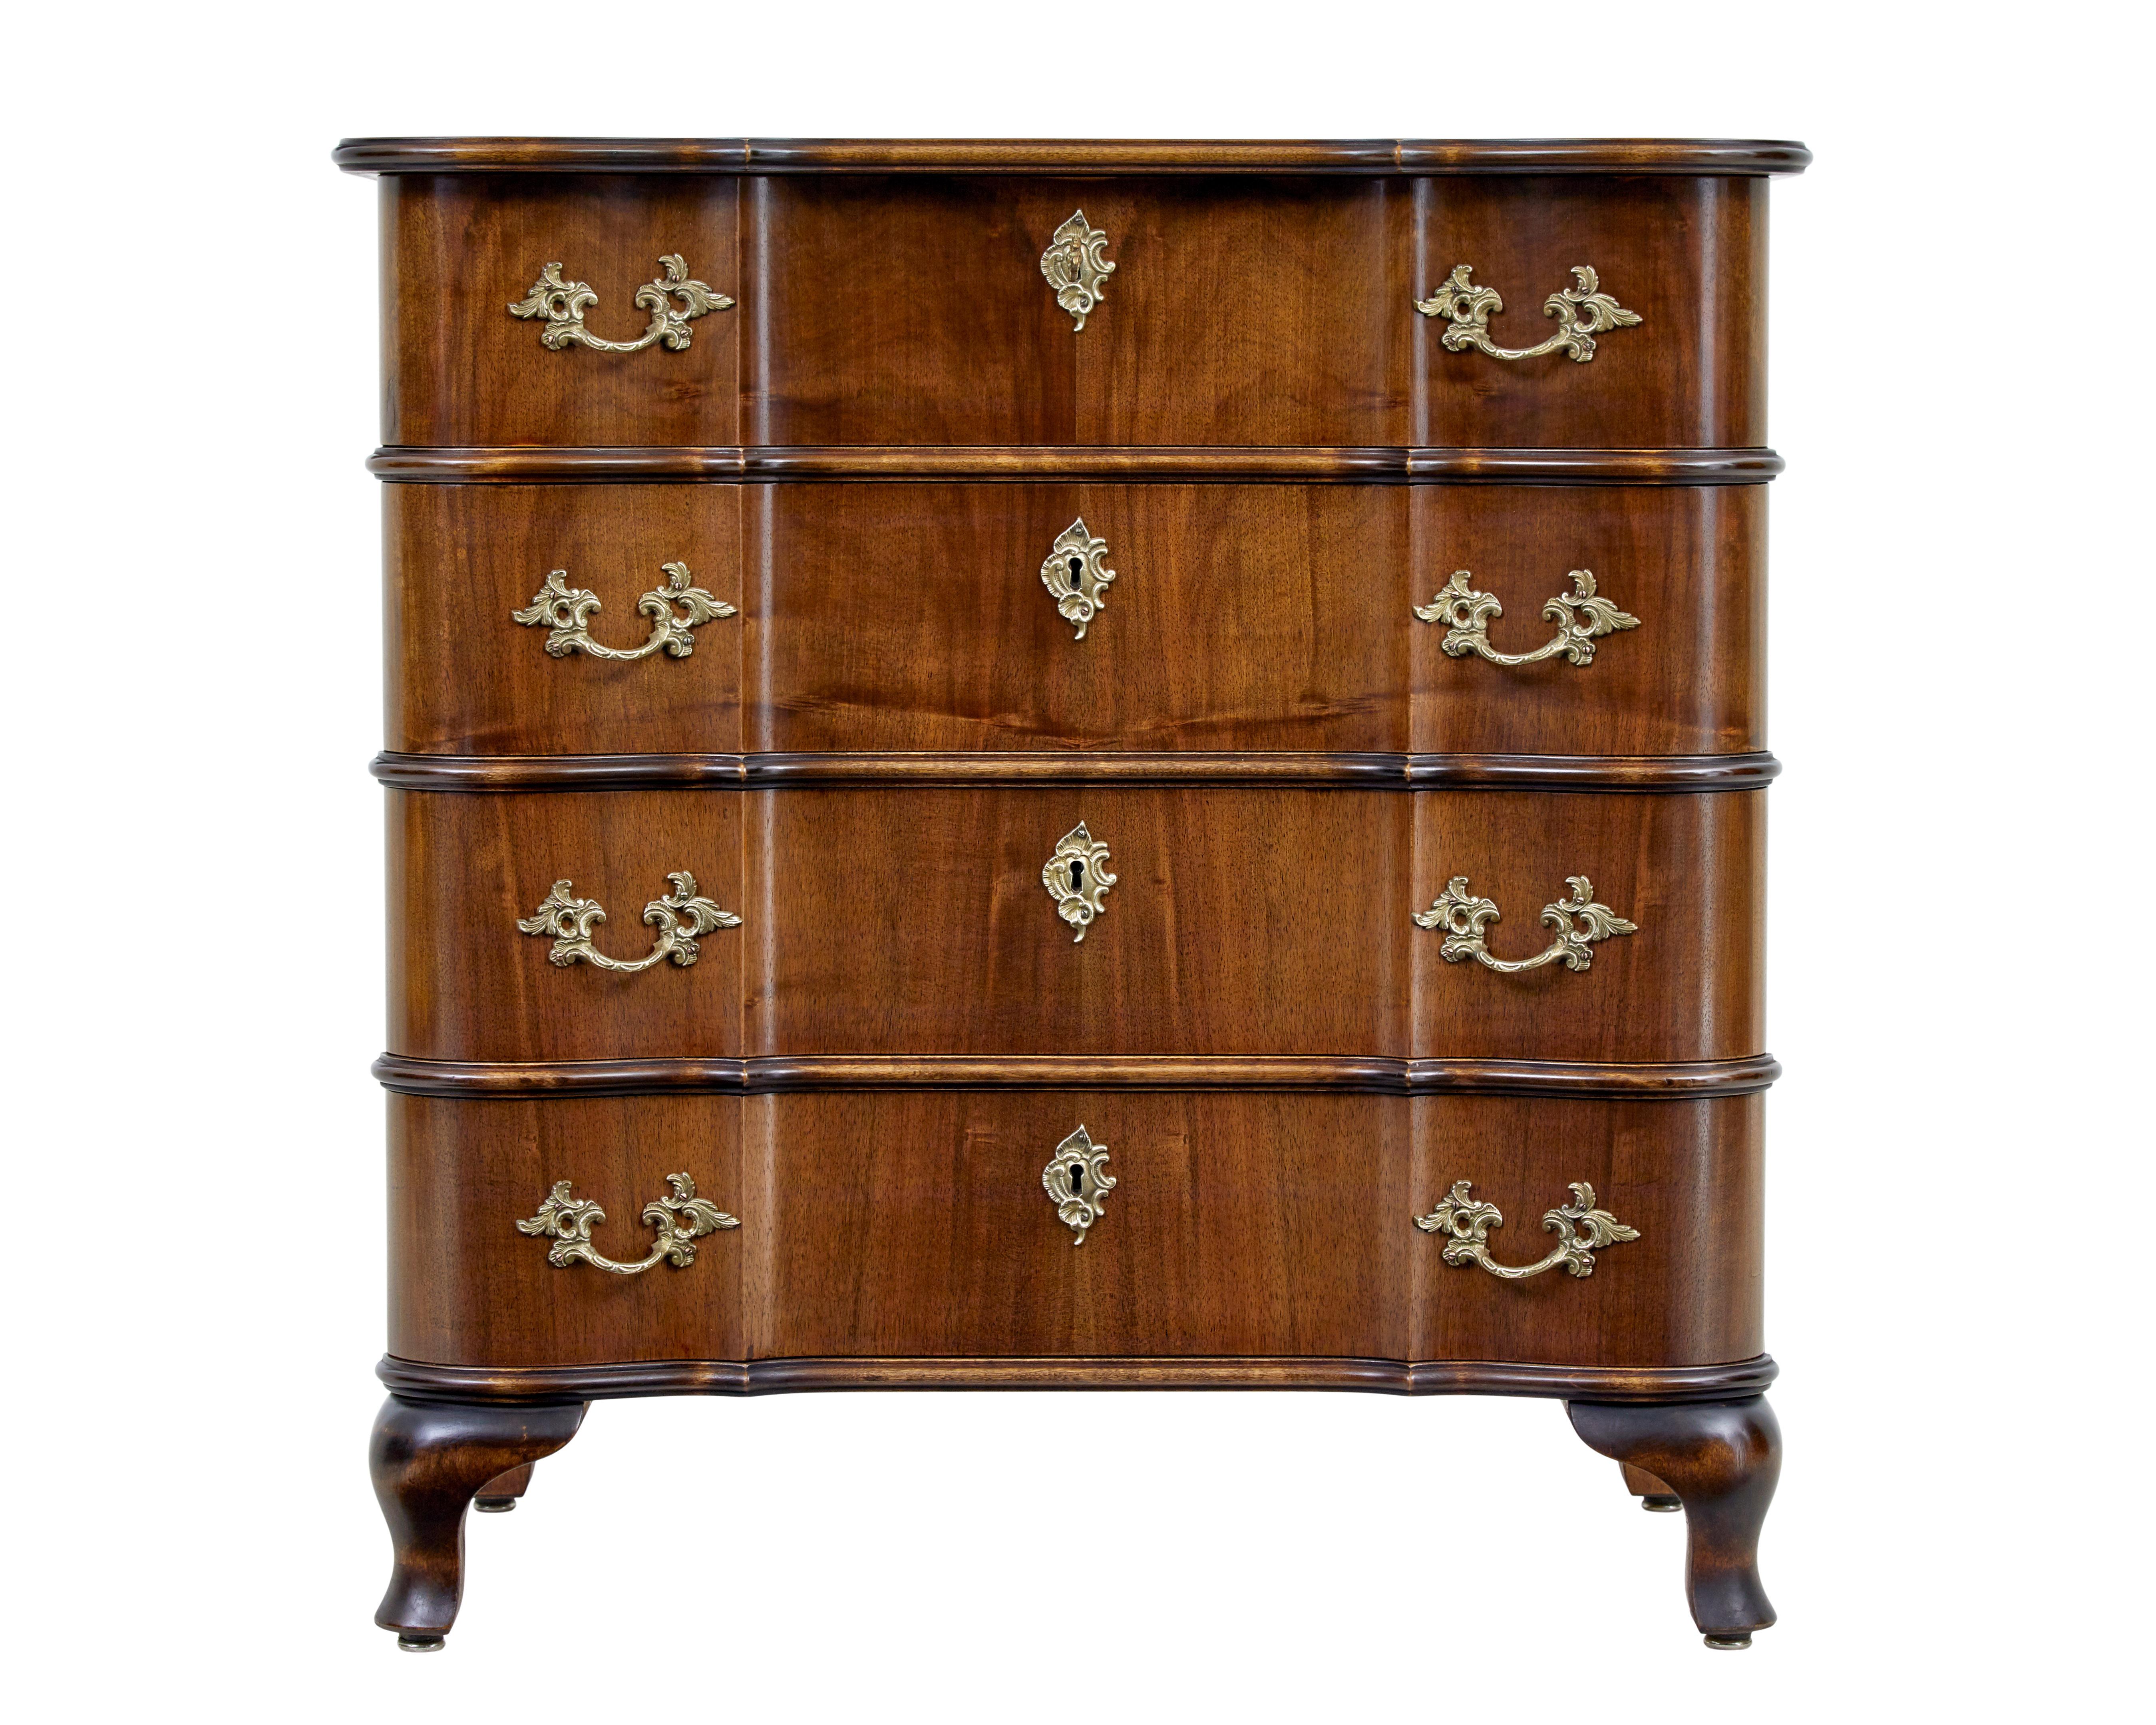 Mid 20th century baroque inspired walnut chest of drawers circa 1950.

Elegant serpentine shaped walnut commode of petit proportions.

4 drawer chest with shaped drawer fronts and top.  Fitted with ornate brass handles and escutheon